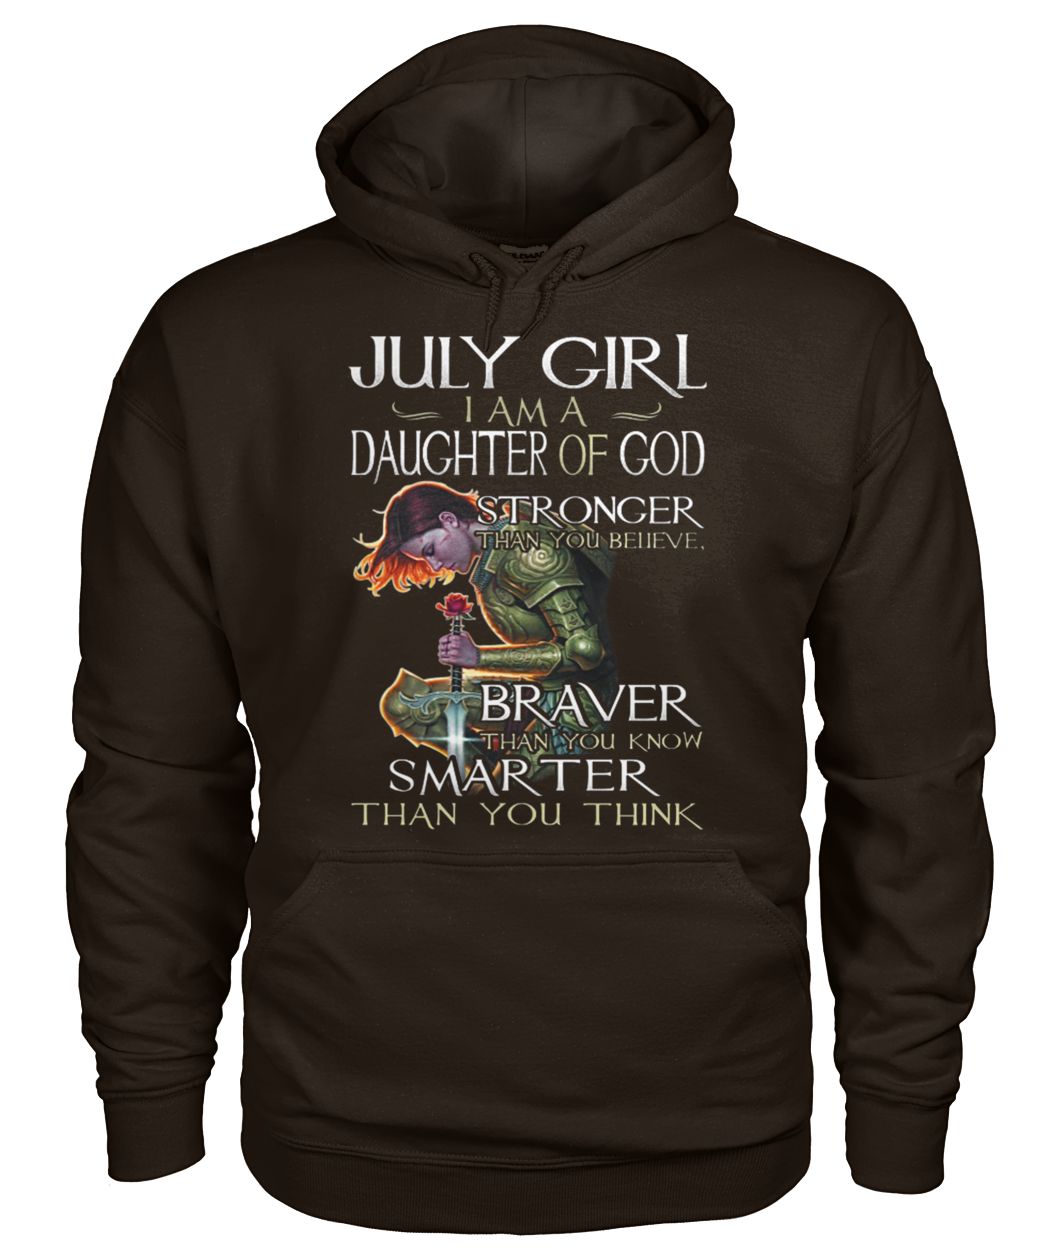 July girl I am a daughter of God stronger than you believe braver than you know smarter than you think gildan hoodie